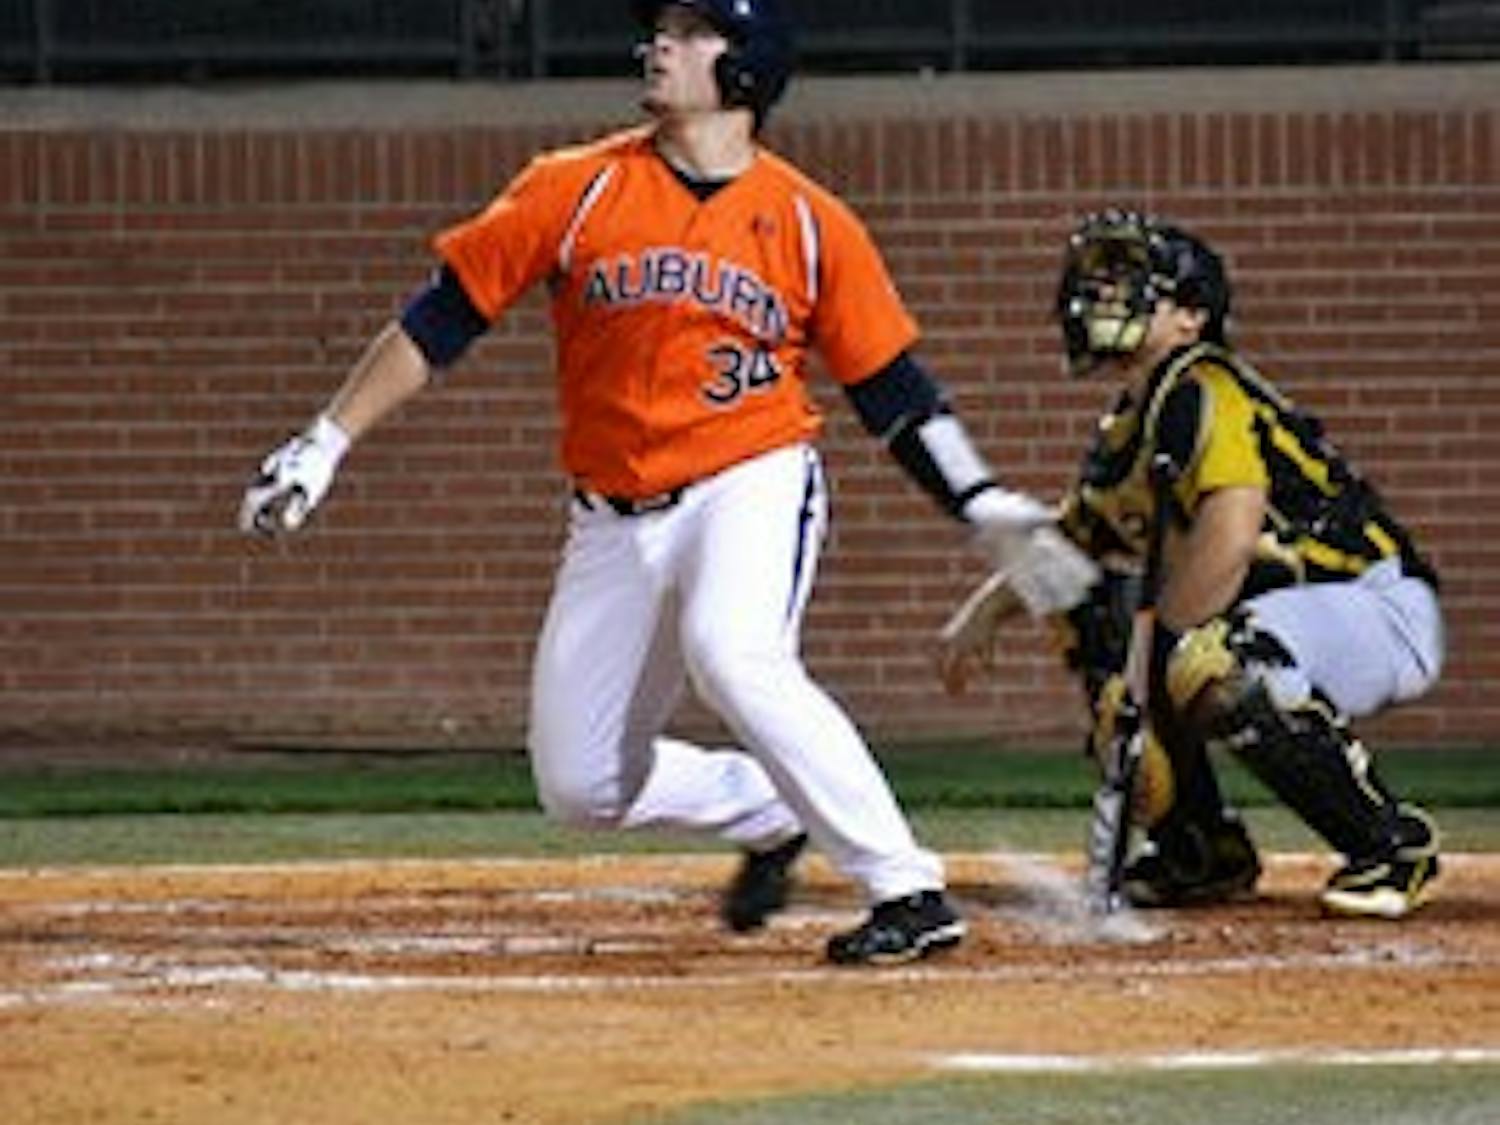 Sophomore catcher Blake Austin bats during the game against Alabama State Tuesday afternoon. (Danielle Lowe / ASSISTANT PHOTO EDITOR)